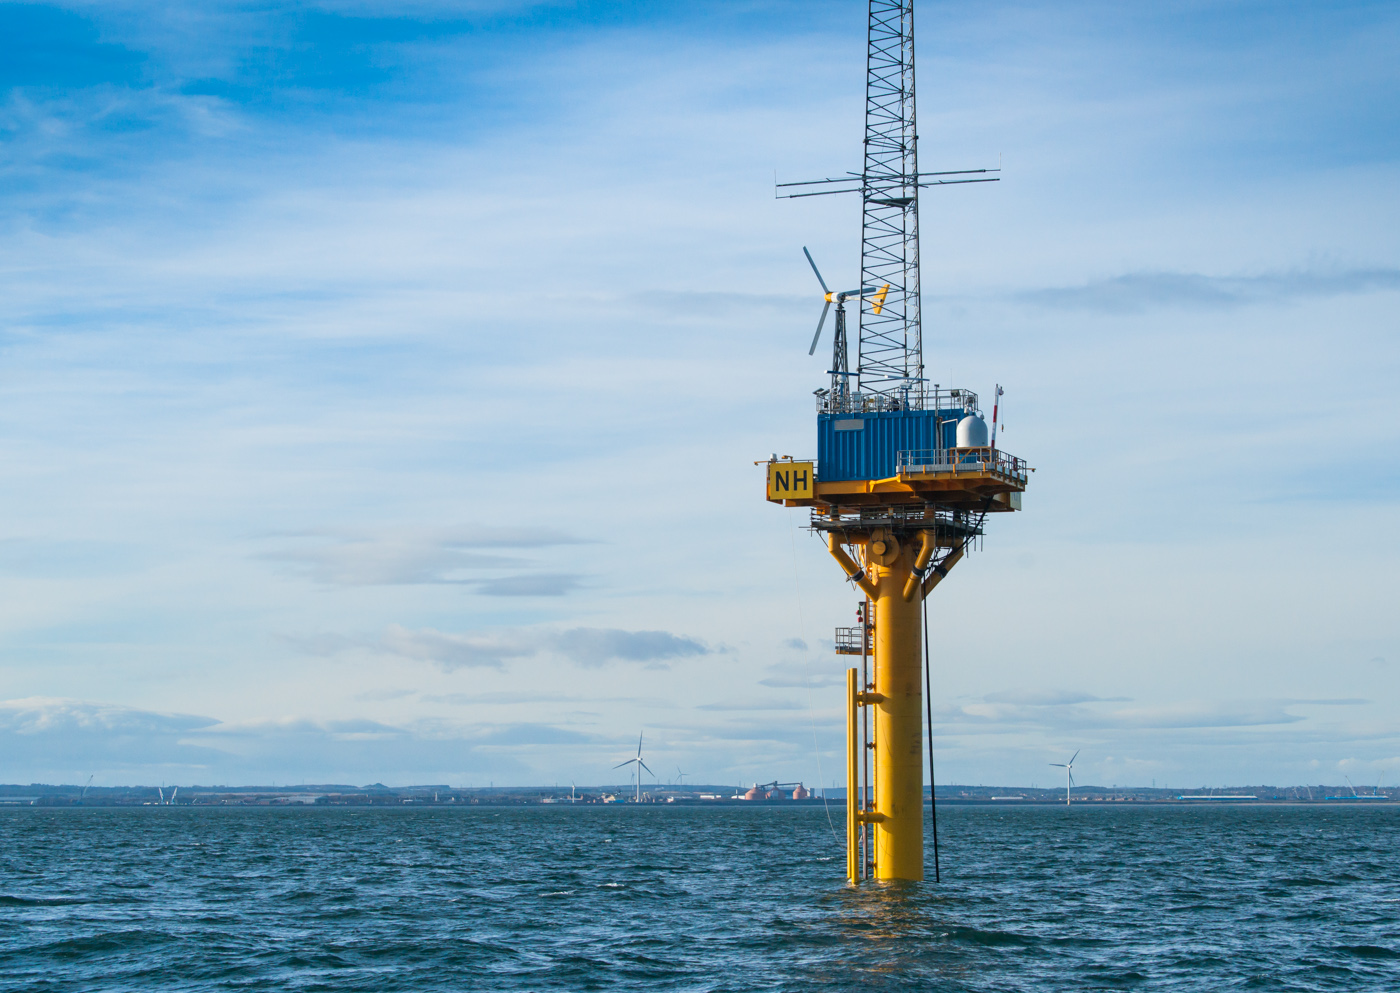 ORE Catapult’s National Offshore Anemometry Hub (NOAH), off the coast of Blyth, Northumberland.